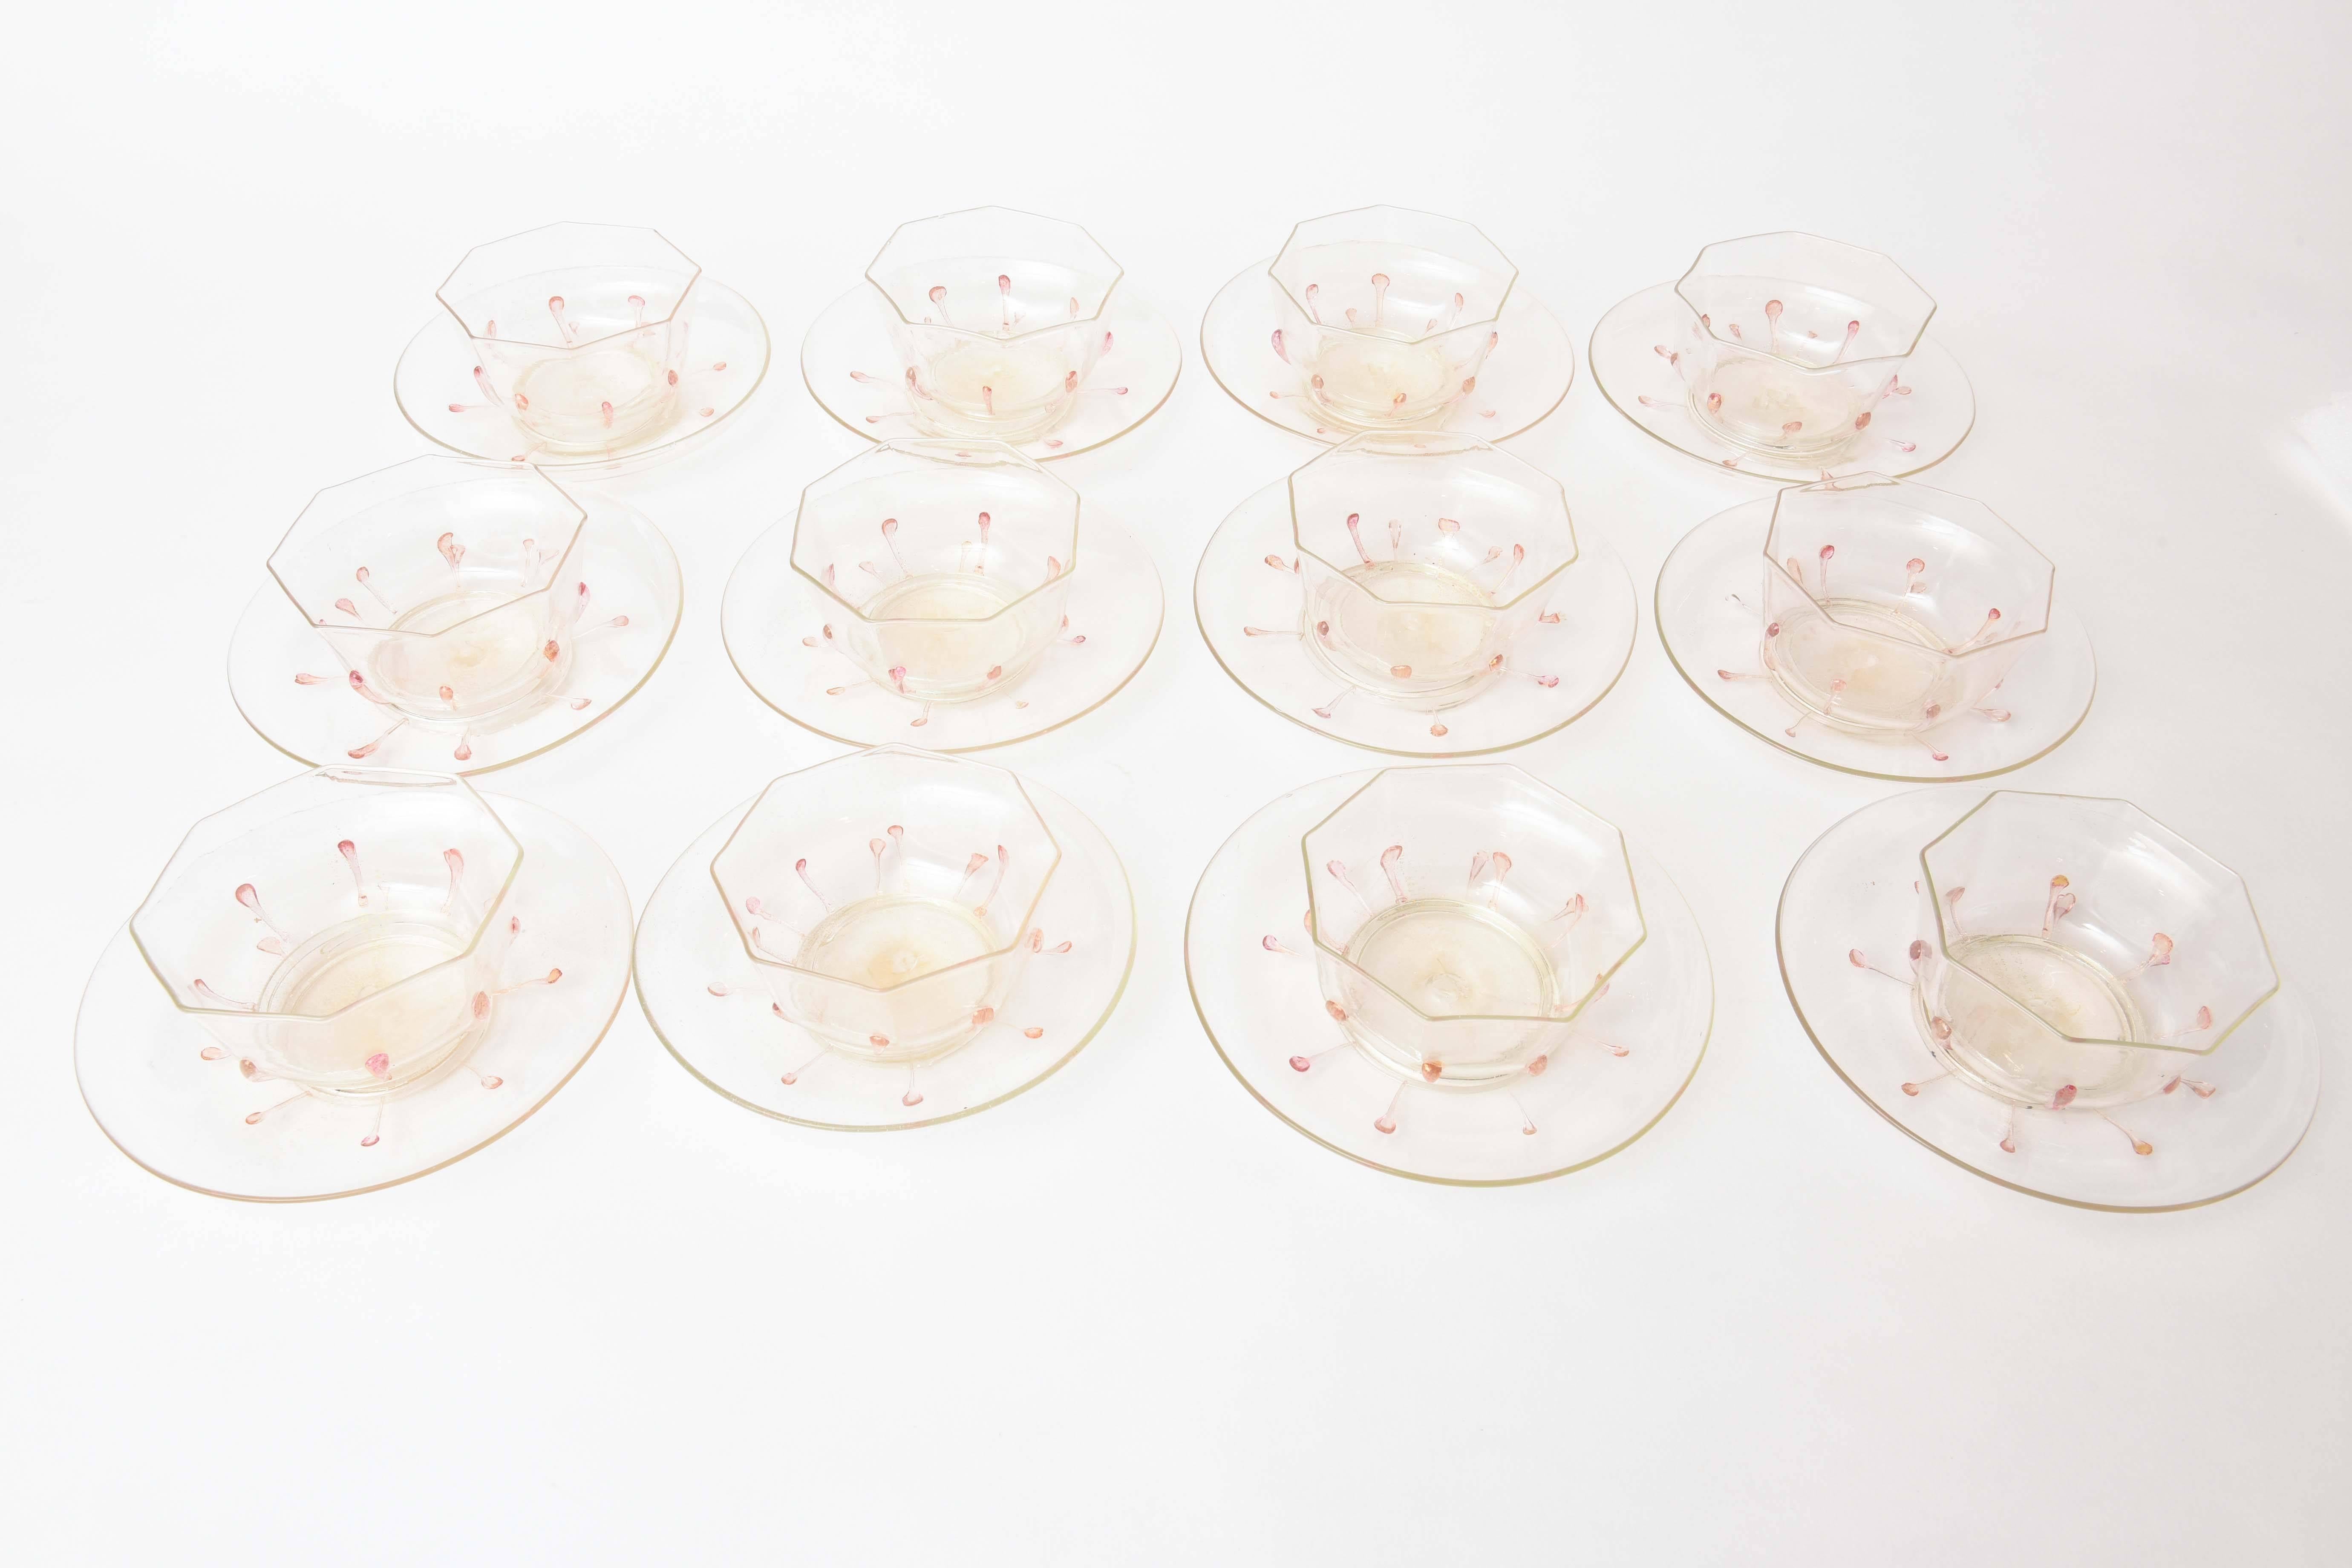 Italian Antique Set of 12 Venetian Glass Bowls, Plates in Pretty Pink and Gold 24 Pieces